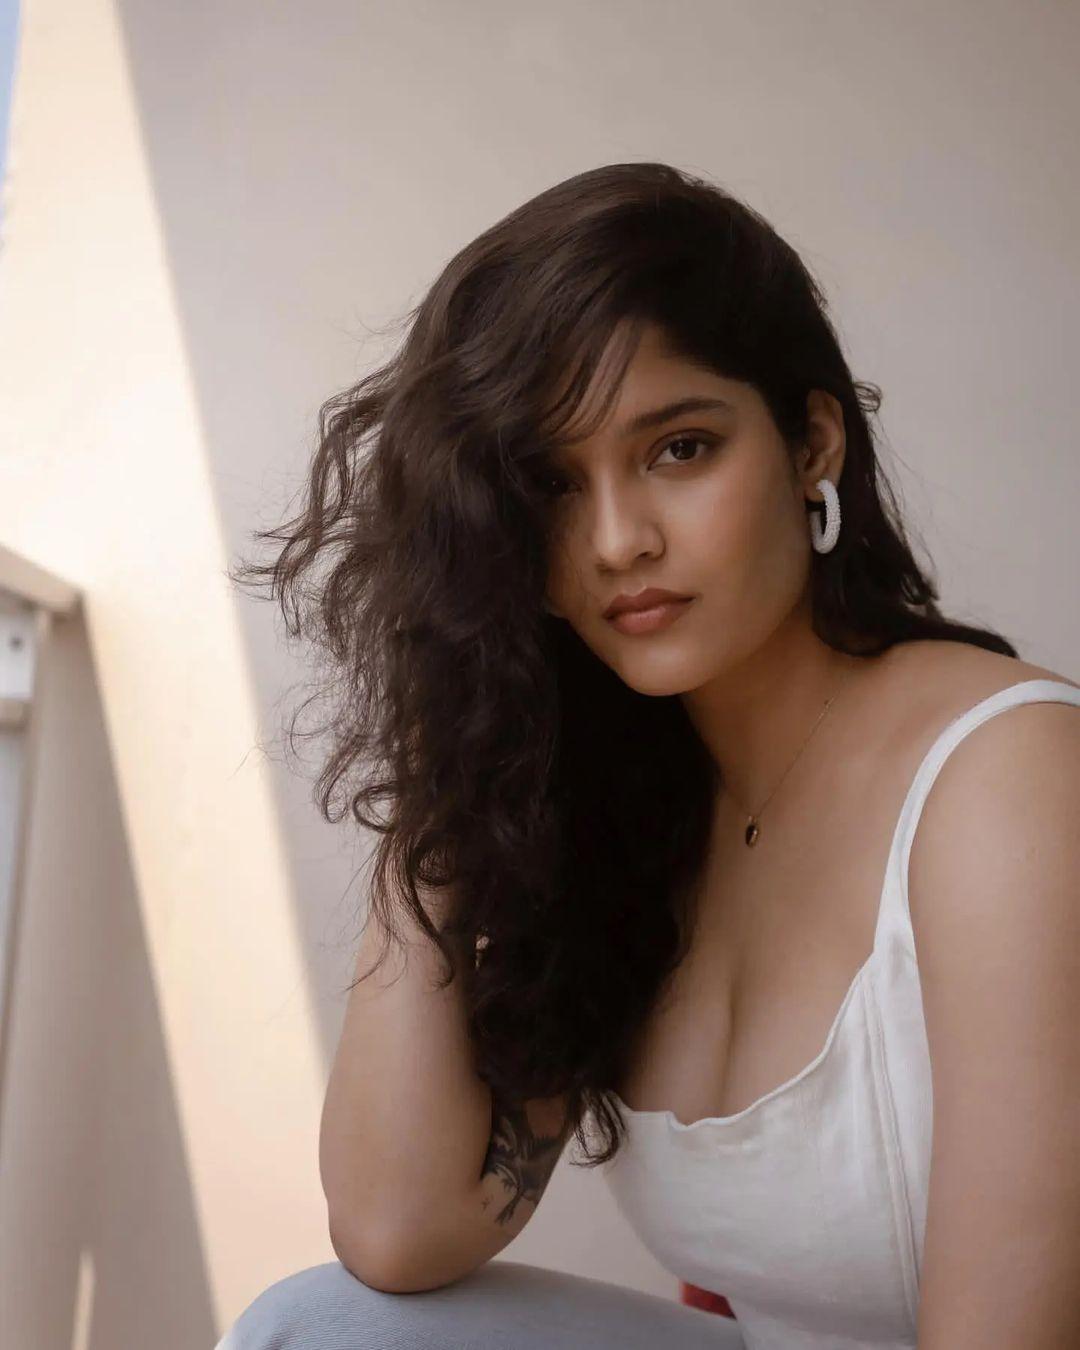 South-Indian-actress-Ritika-Singh-exposing-cleavage-photos-in-white-dress-hot-and-sexy-photoshoot--82486.jpg